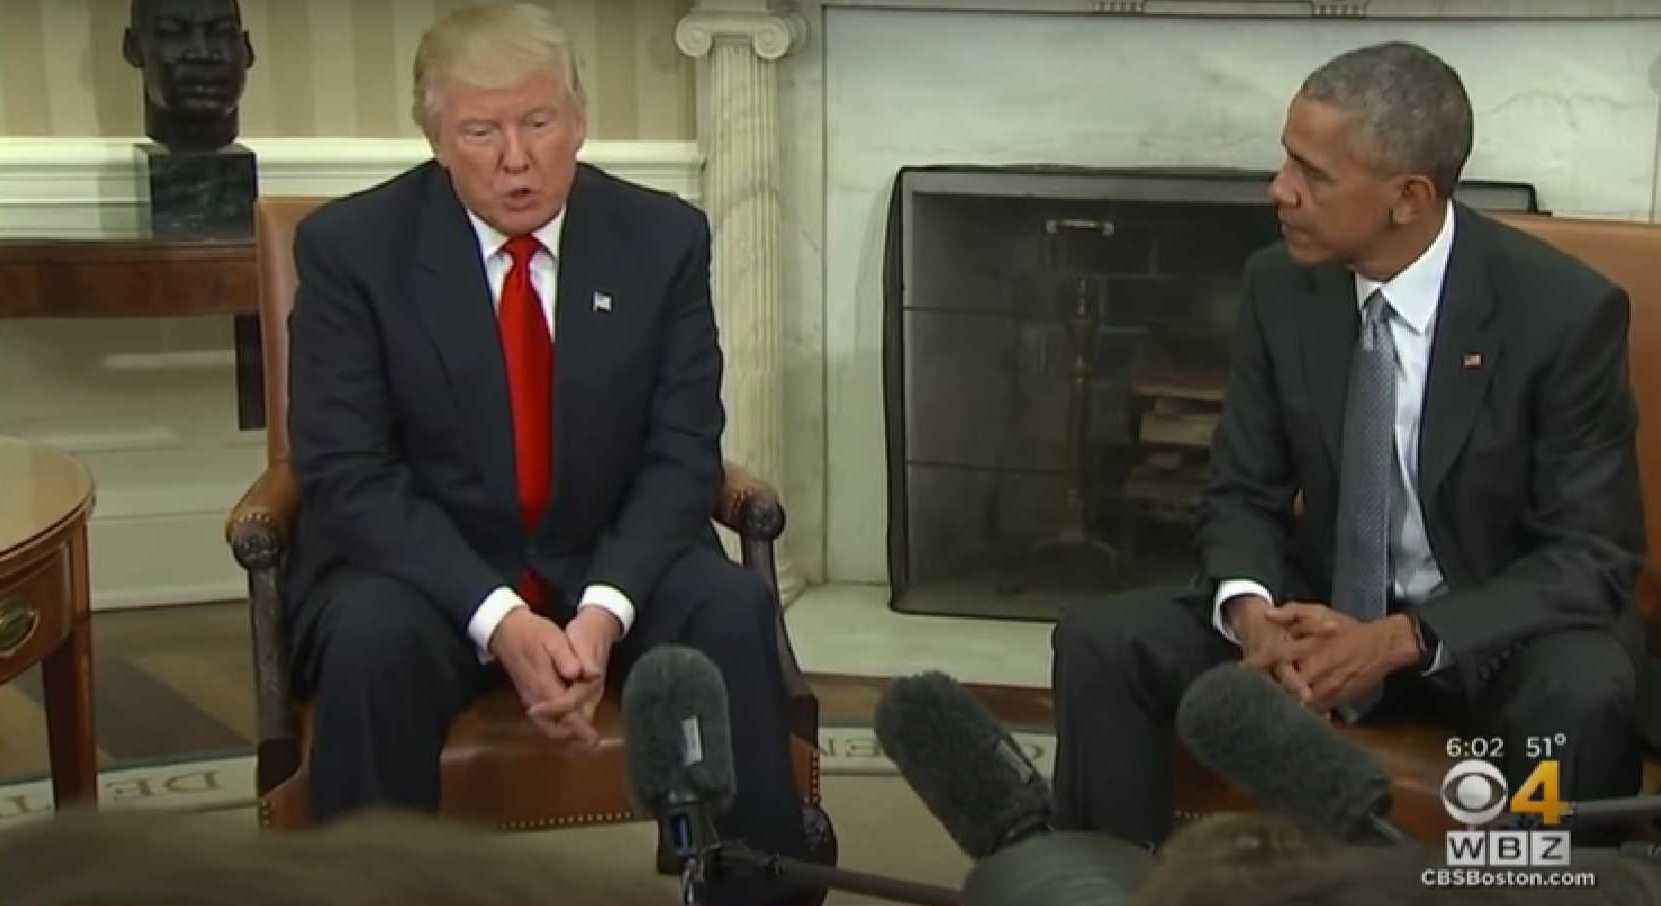 Donald Trump and Barak Obama during a meeting in the Oval Office